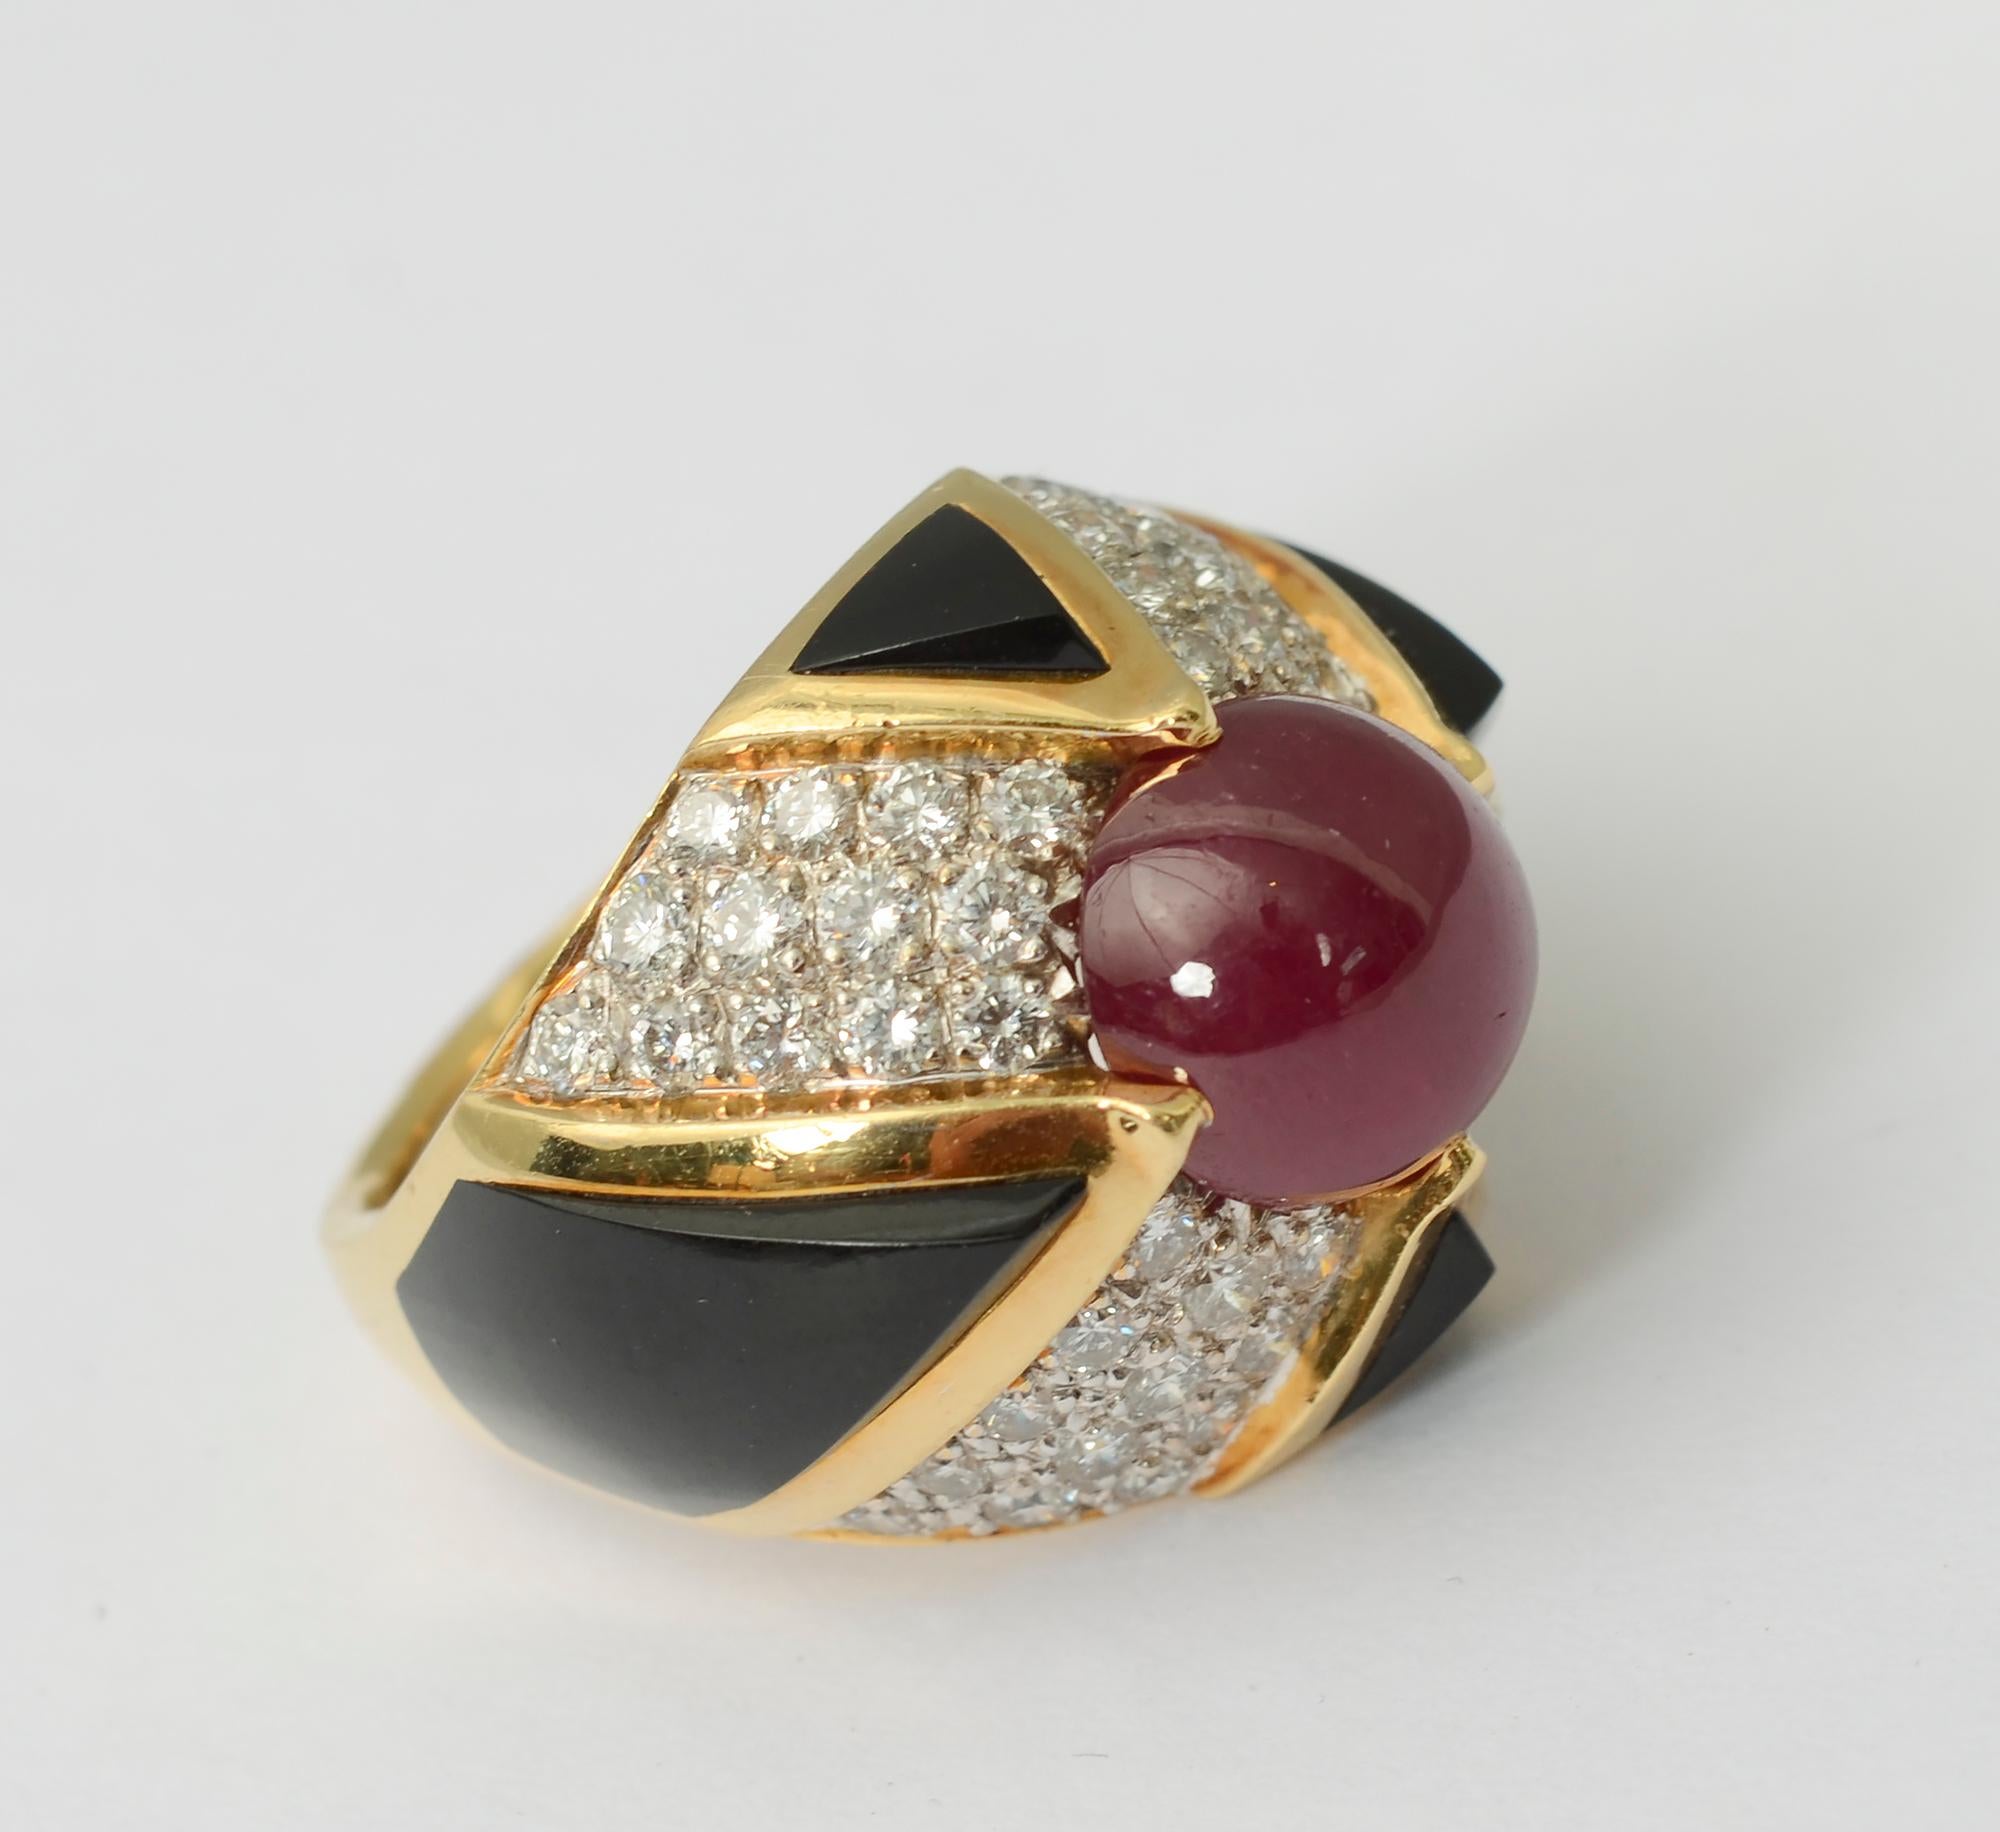 Custom made, elegant domed cocktail ring of ruby; diamonds and carved black onyx. The central cabochon ruby is approximately 4 carats. Geometric shapes of carved onyx overlap the ruby to serve as prongs. The ring is size 
6 1/2 with an interior